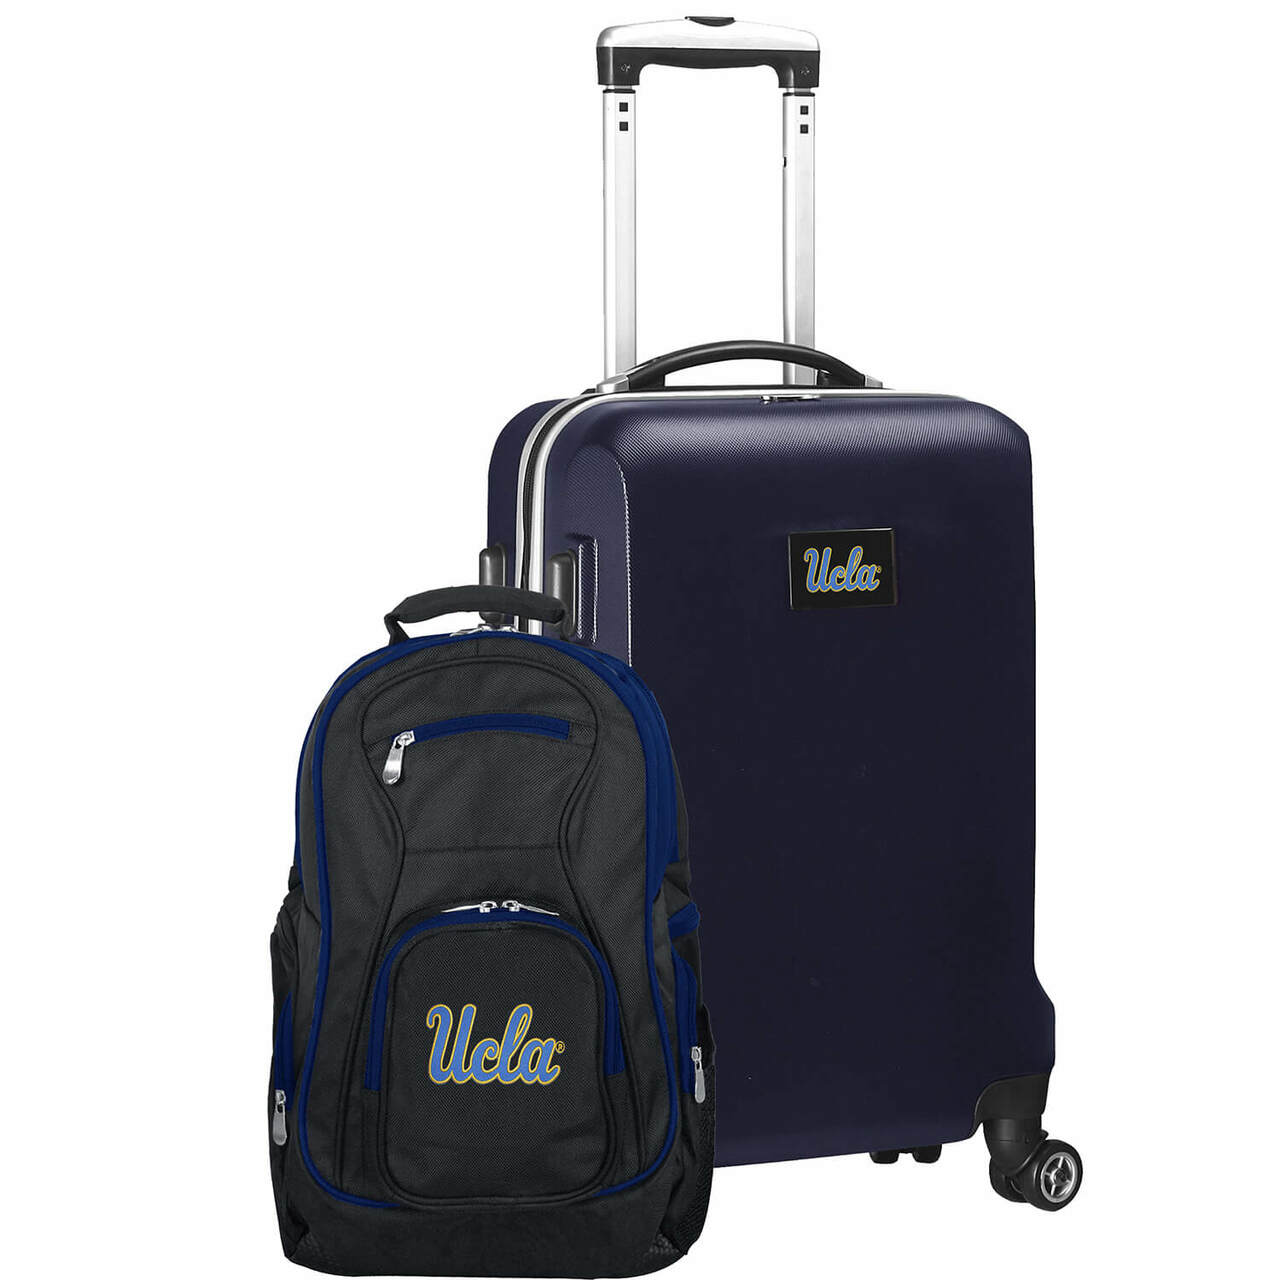 UCLA Bruins Deluxe 2-Piece Backpack and Carry-on Set in Navy